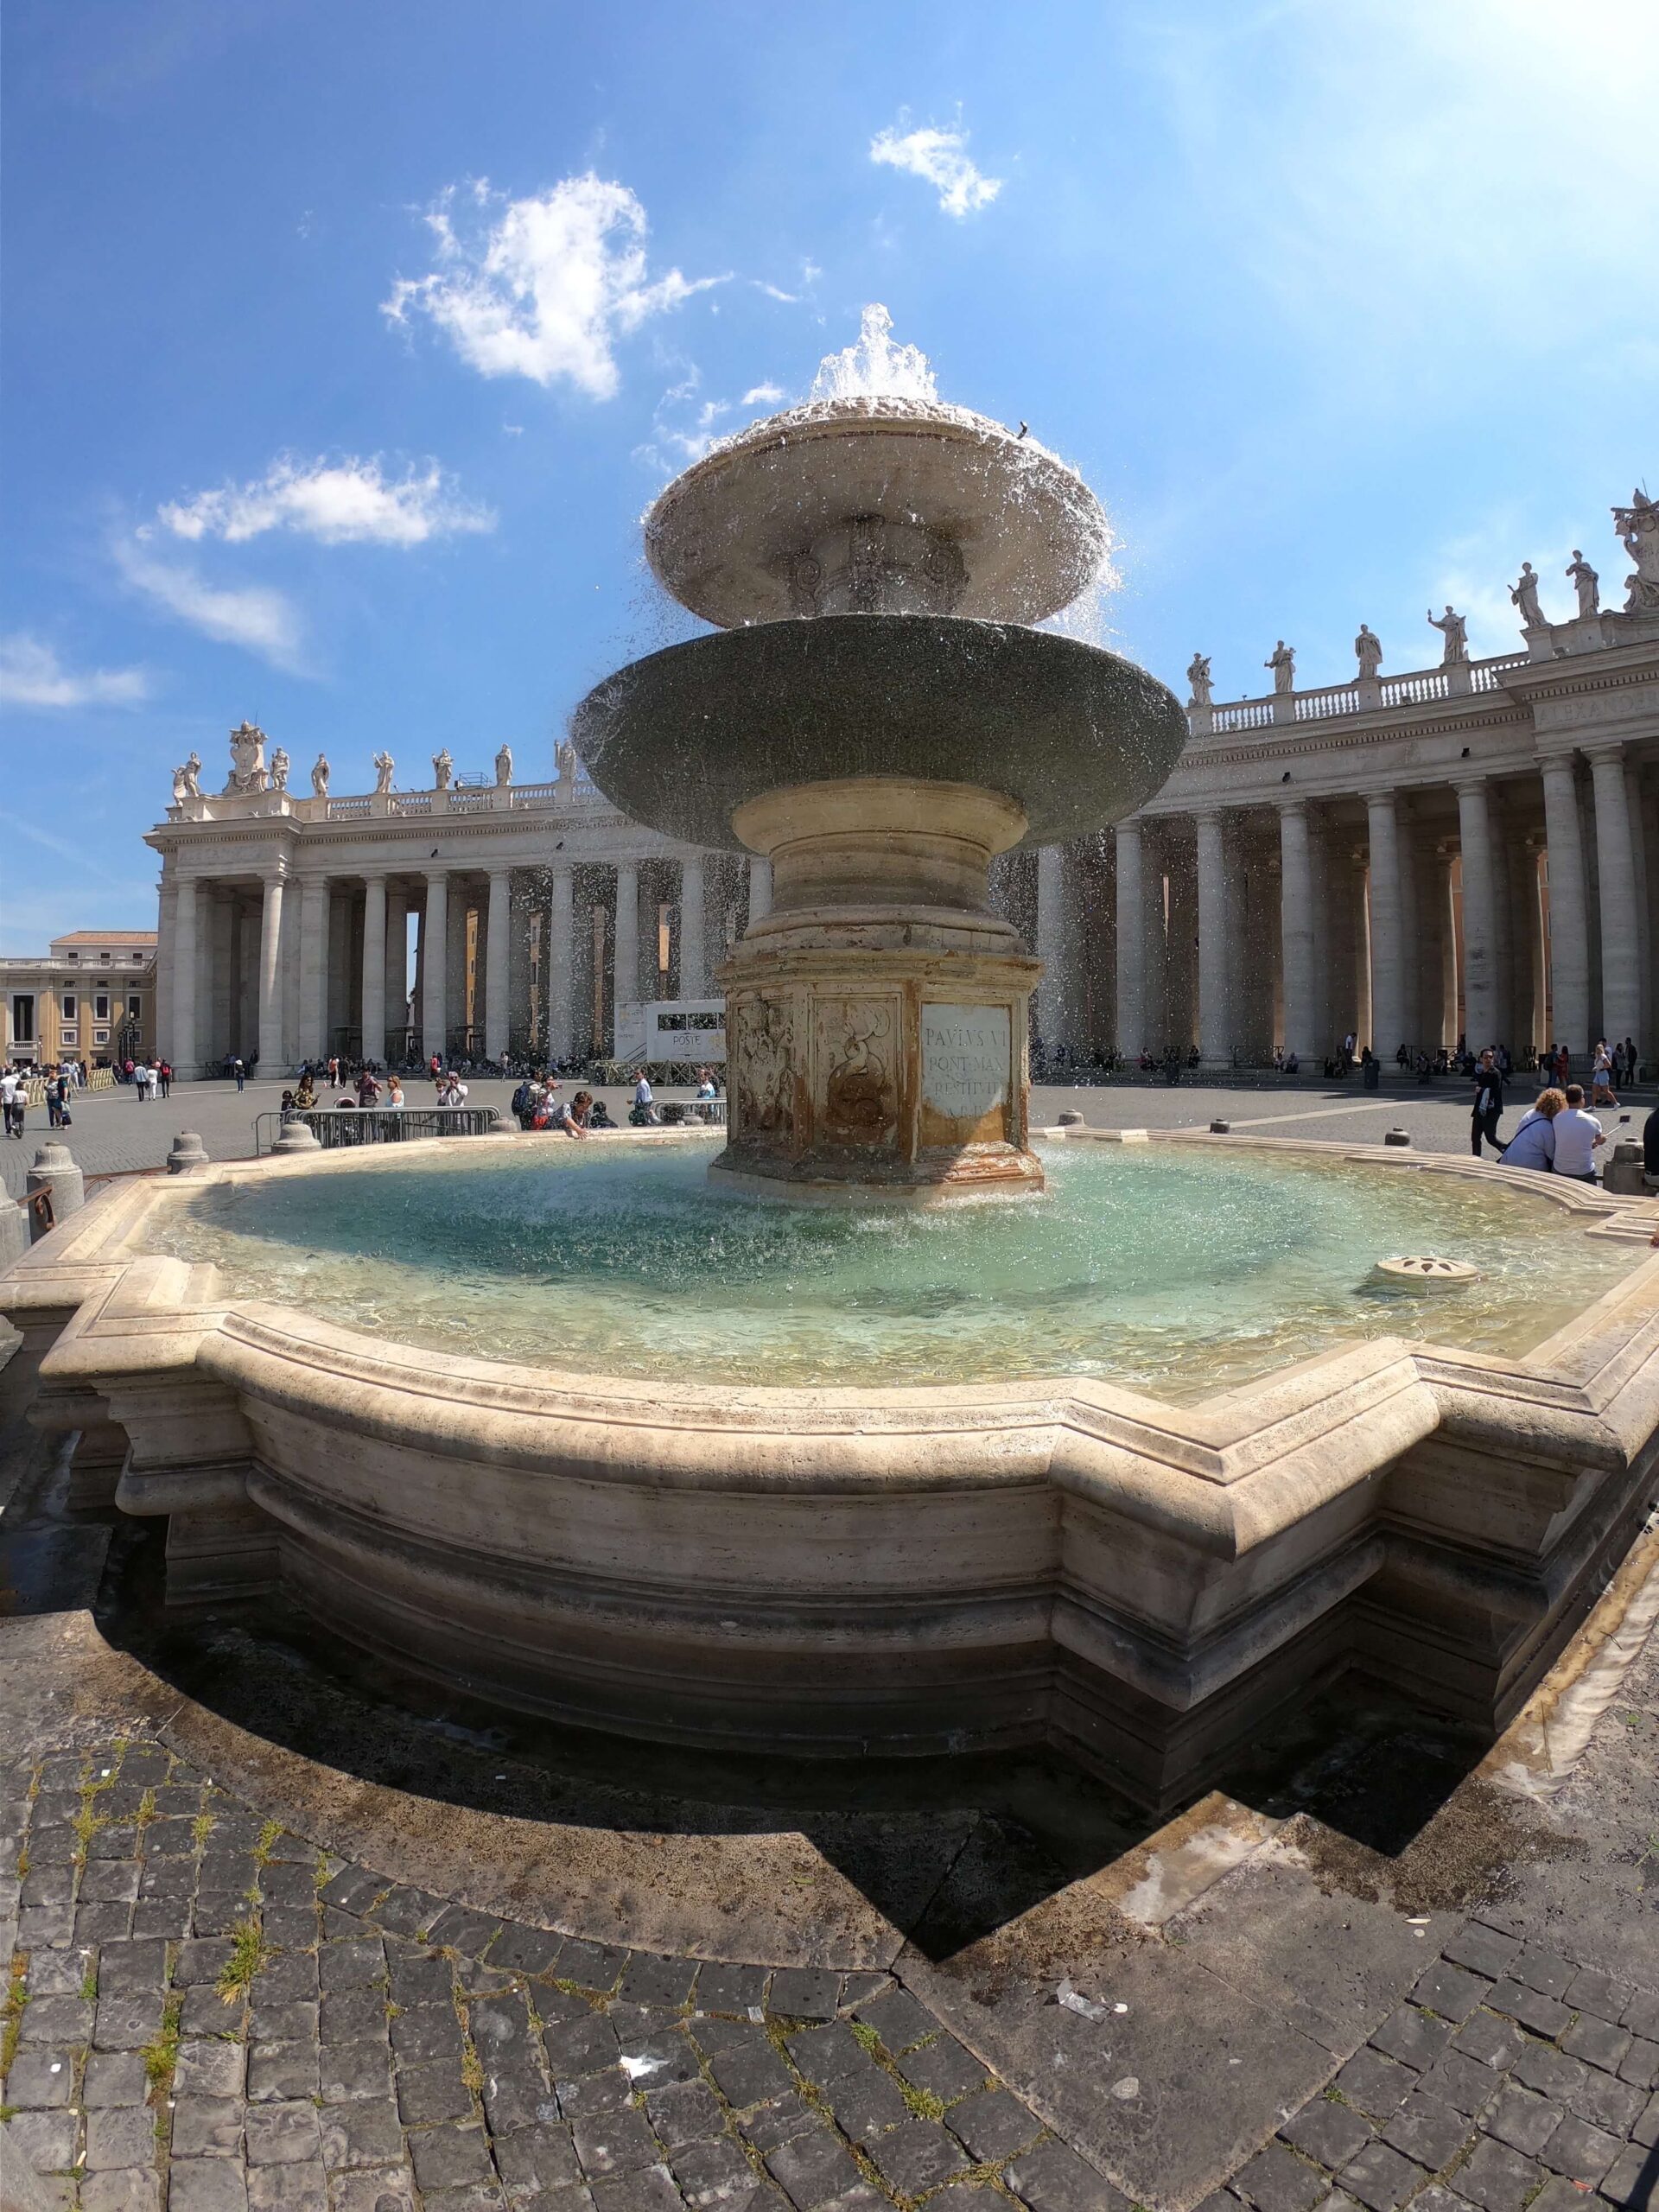 St. Peter's Square Fountains, Vatican City